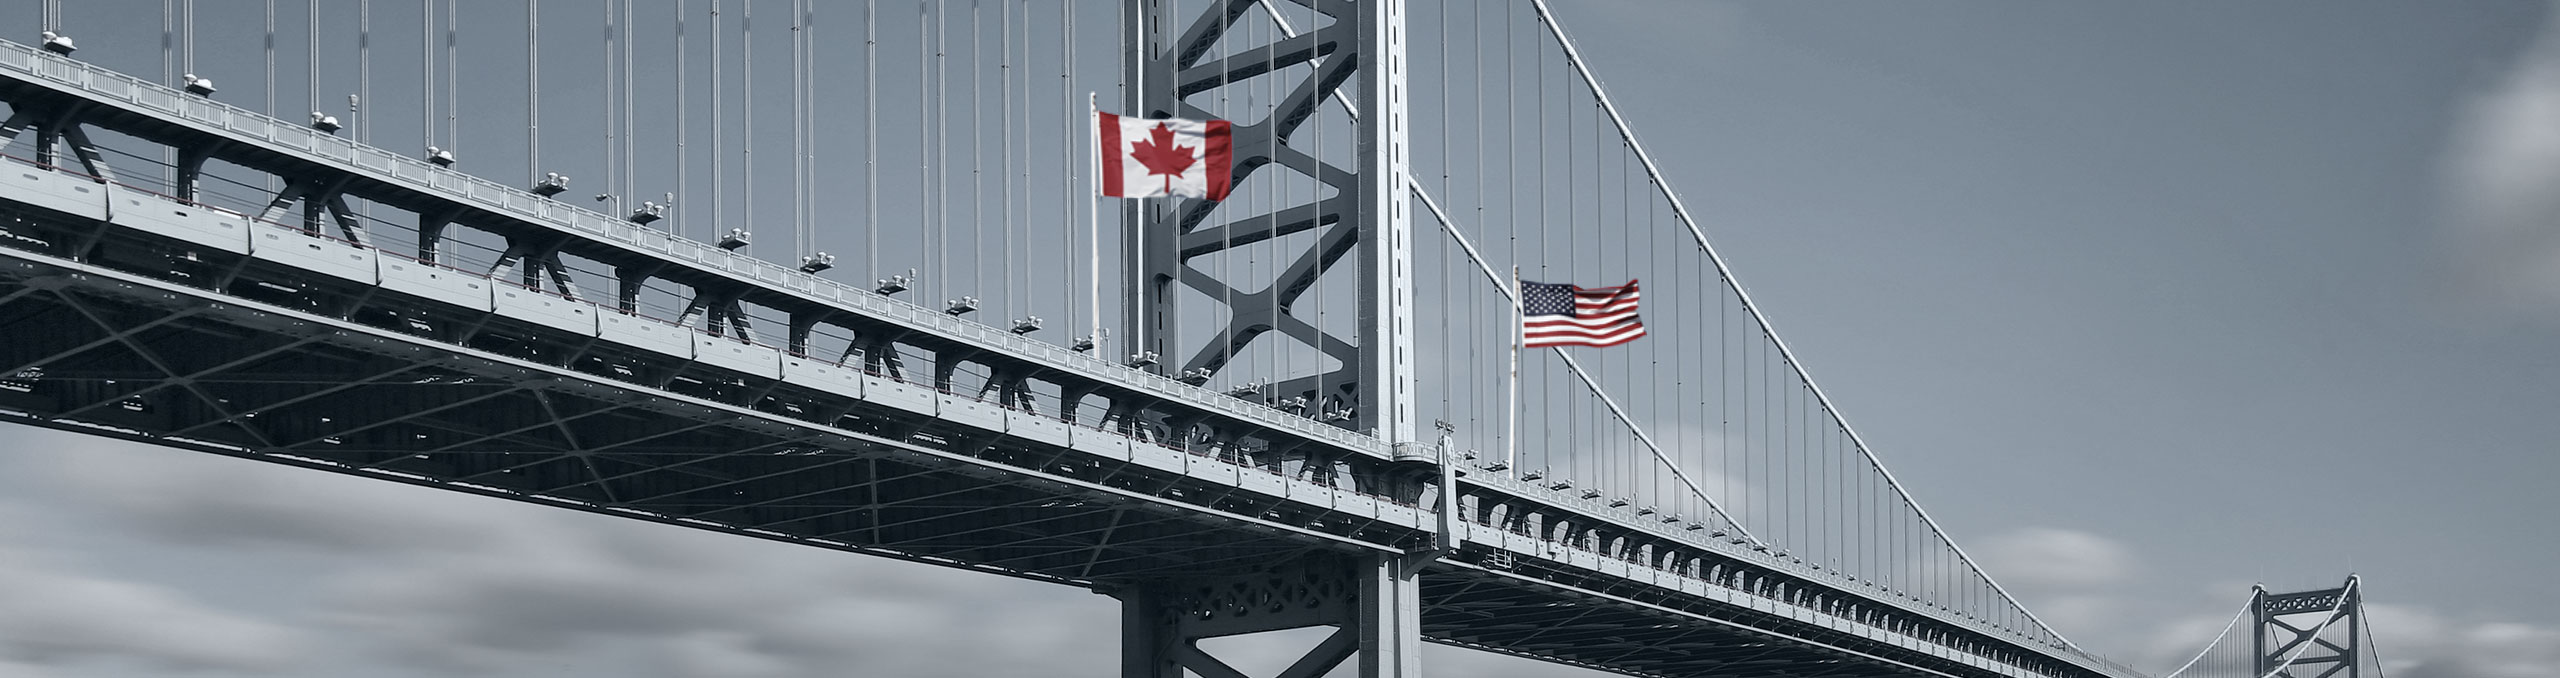 Bridge spanning between Canada and the USA